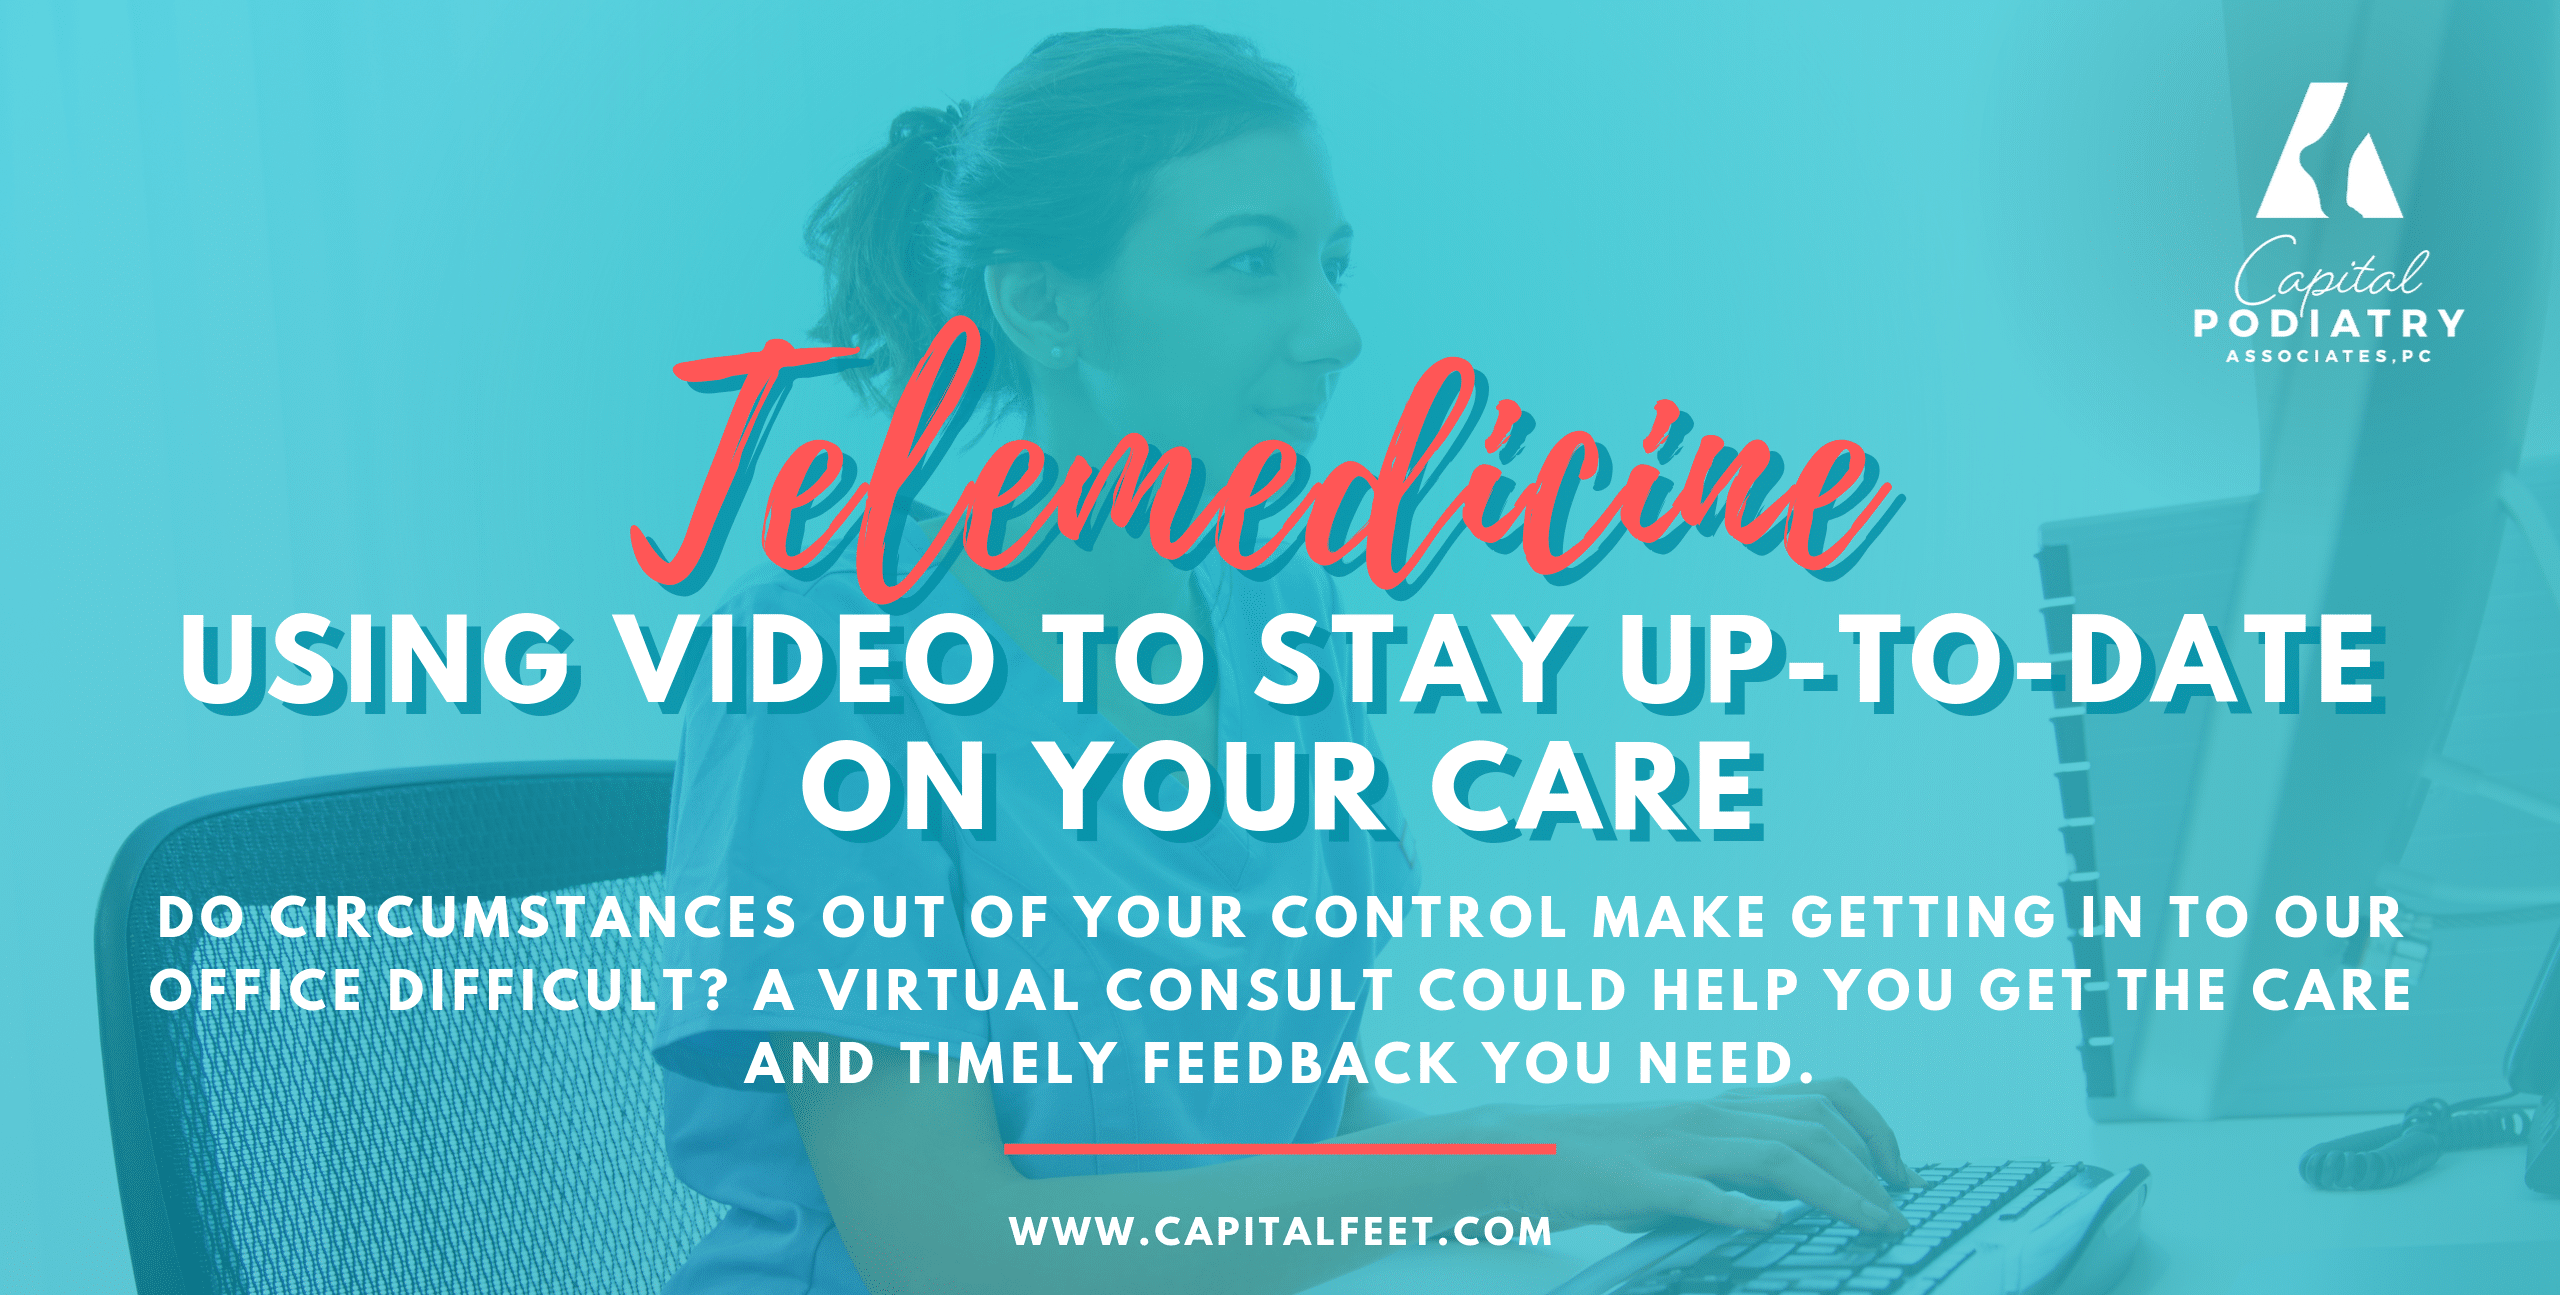 Telemedicine: Using Video To Stay Up-to-Date on Your Care